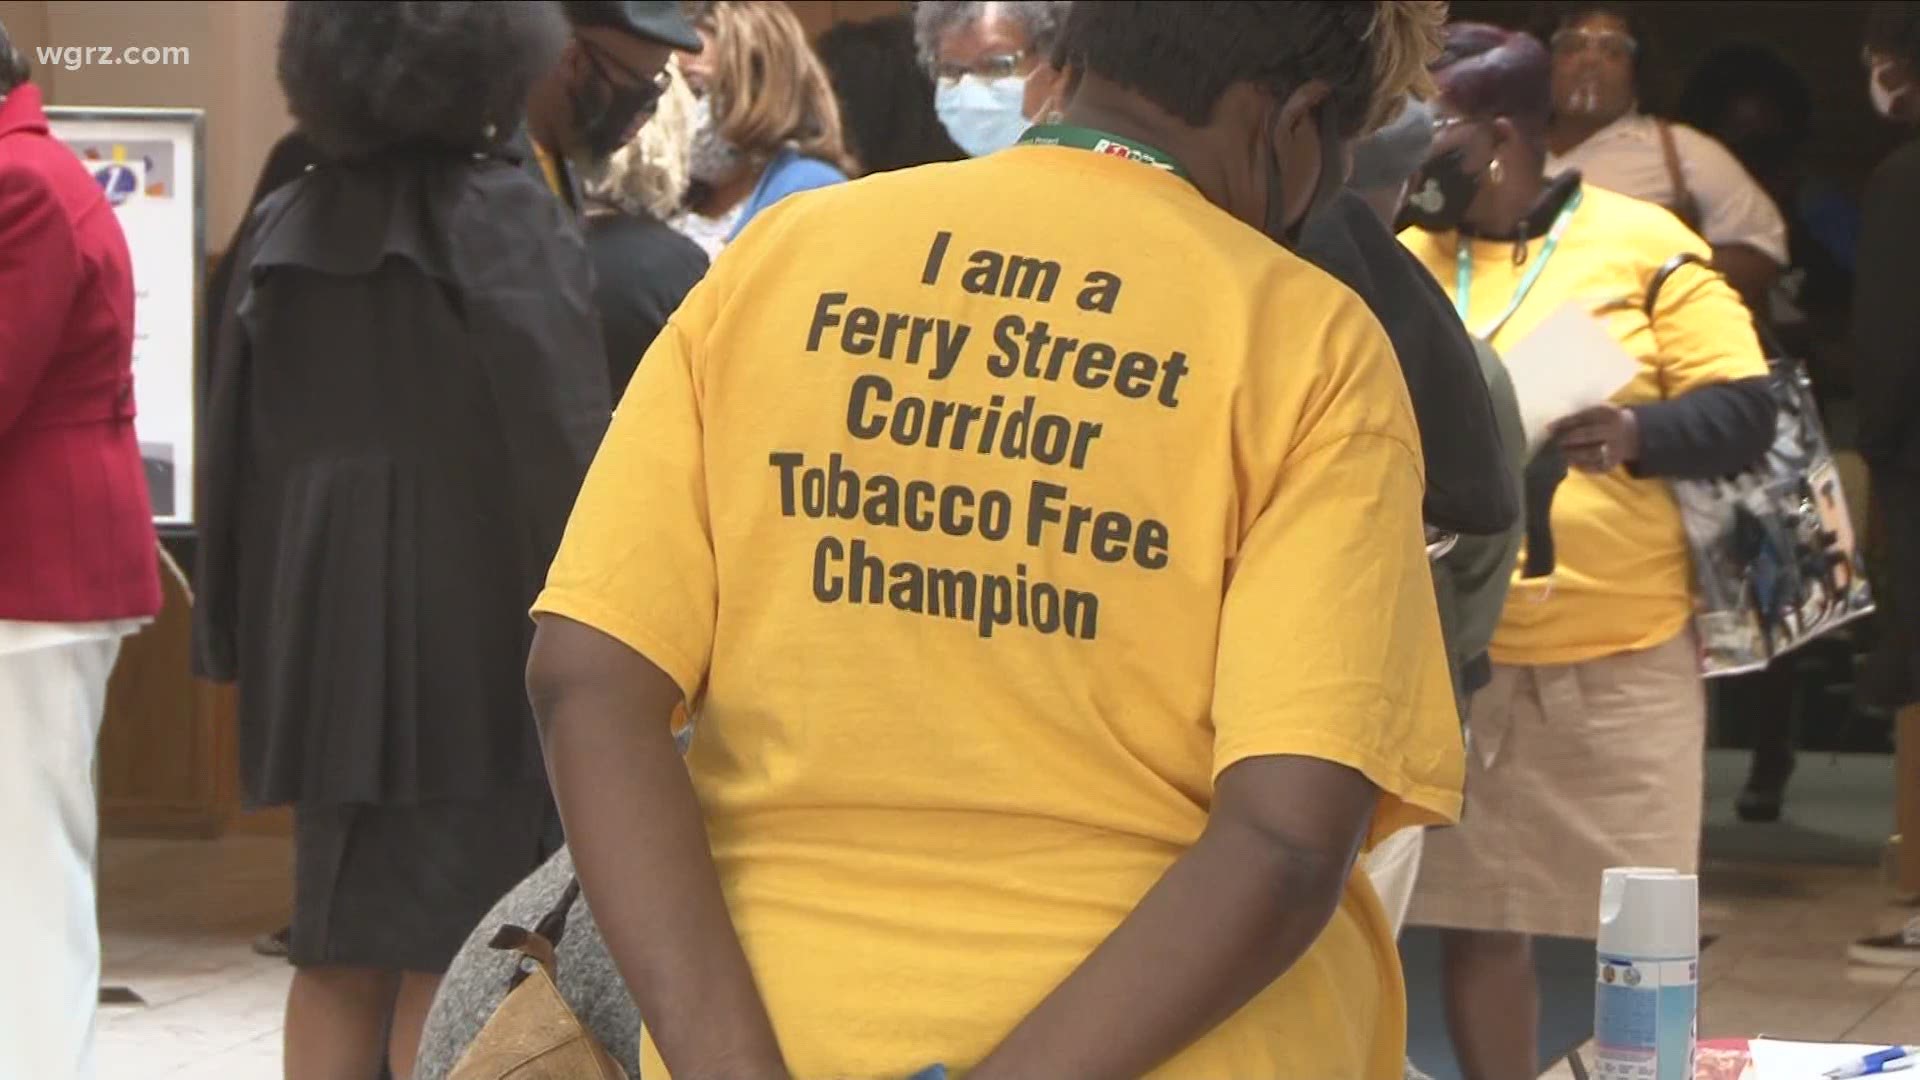 Bethesda World Harvest International Church and several area businesses announced a new tobacco free policy to promote public health and wellness.